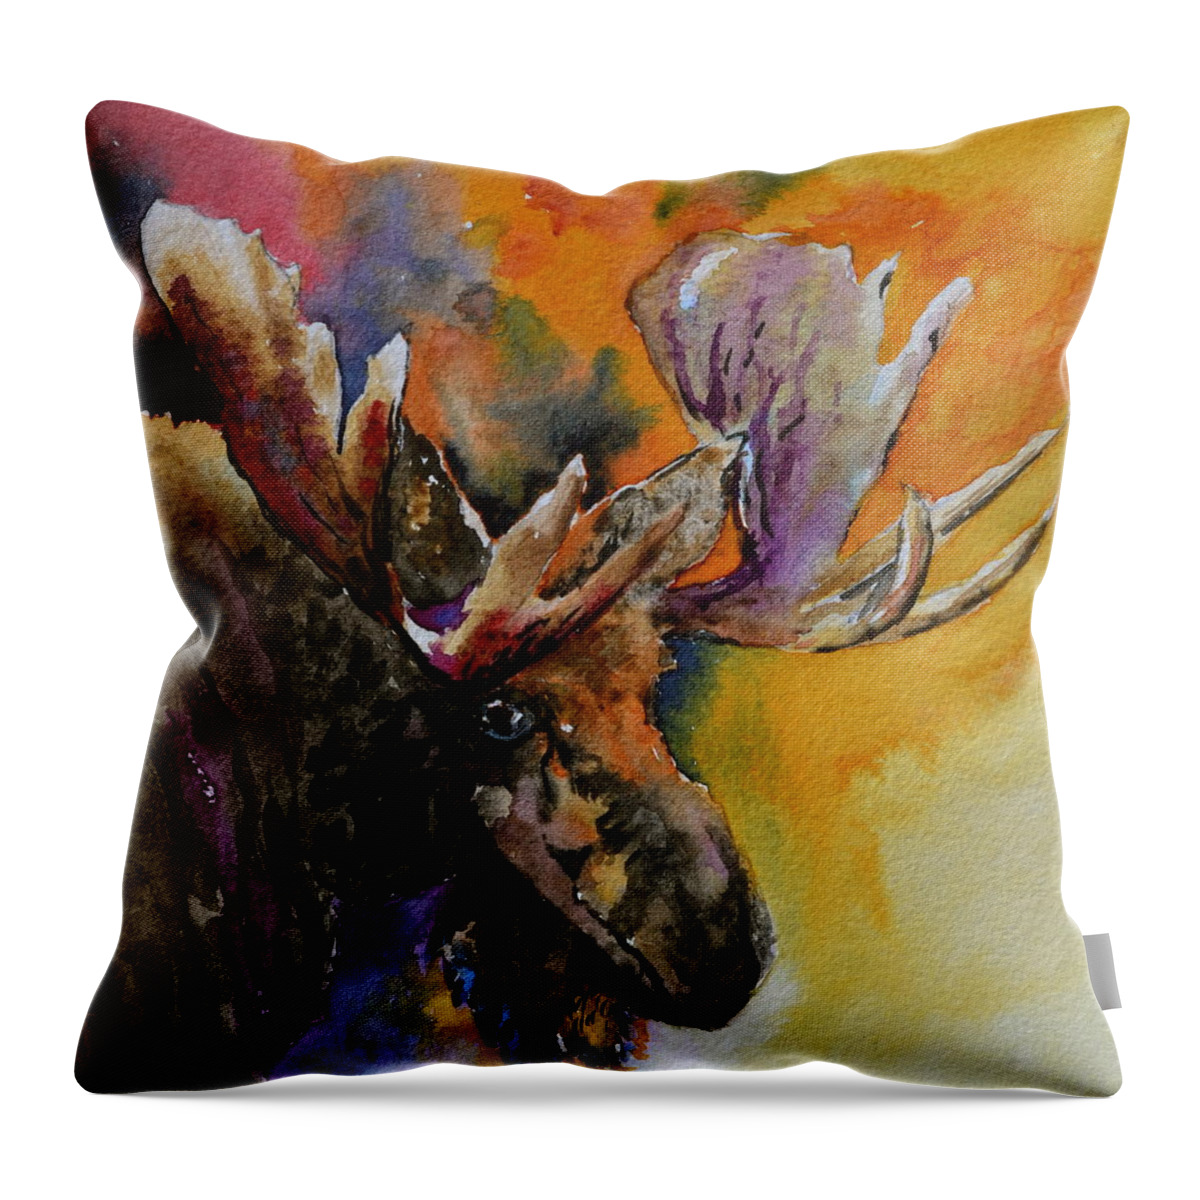 Moose Throw Pillow featuring the painting Sly Moose by Beverley Harper Tinsley